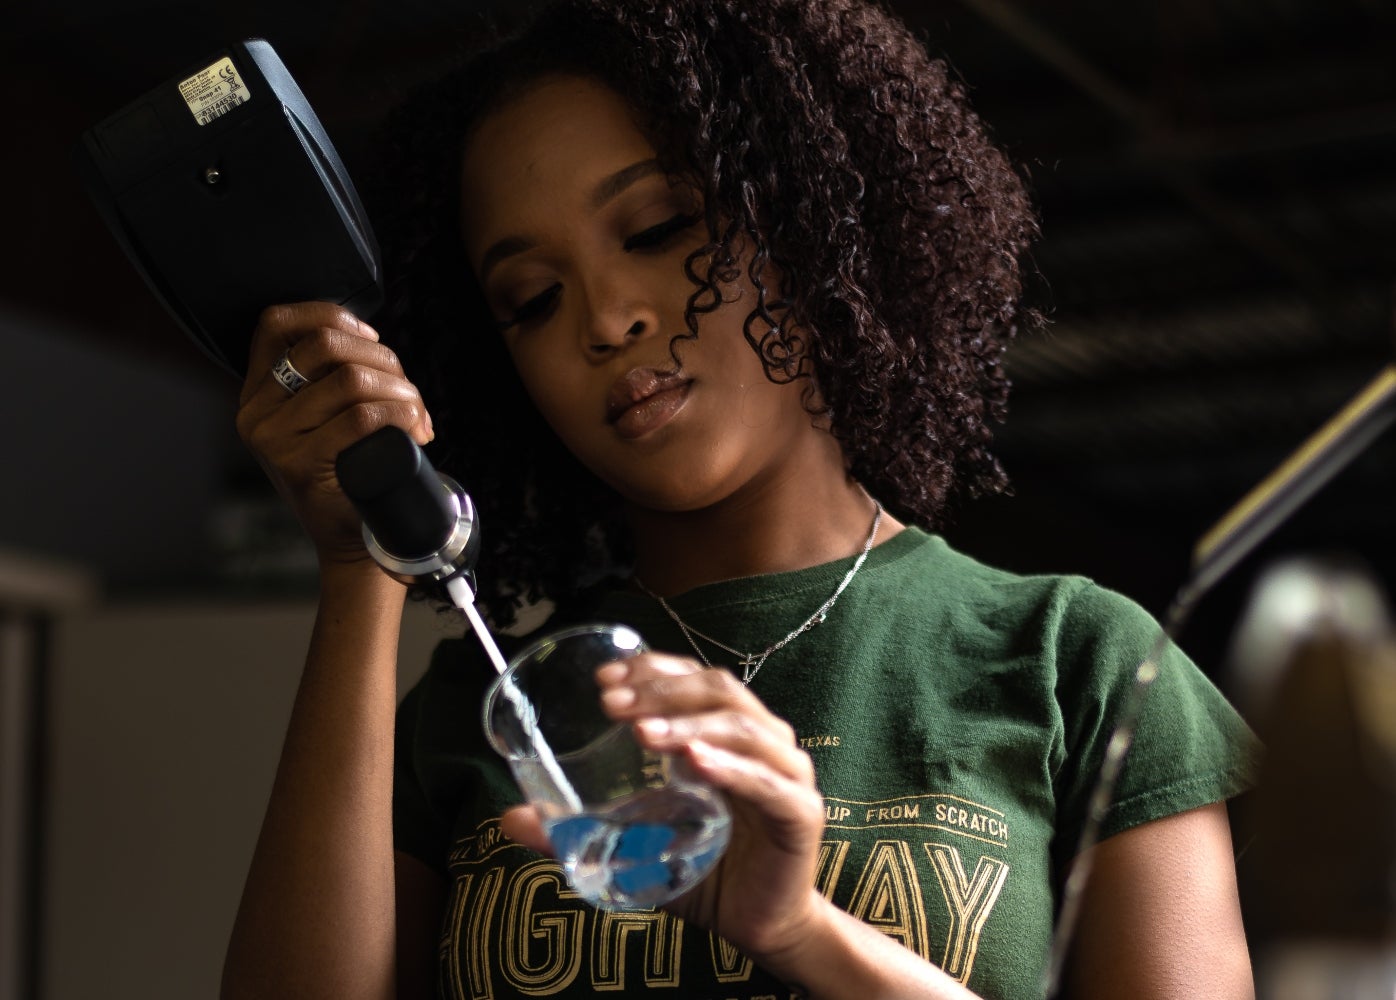 Let's Toast: Codi Fuller, Youngest Black Woman Distiller In The U.S., Is Crafting A Hangover-Free Vodka